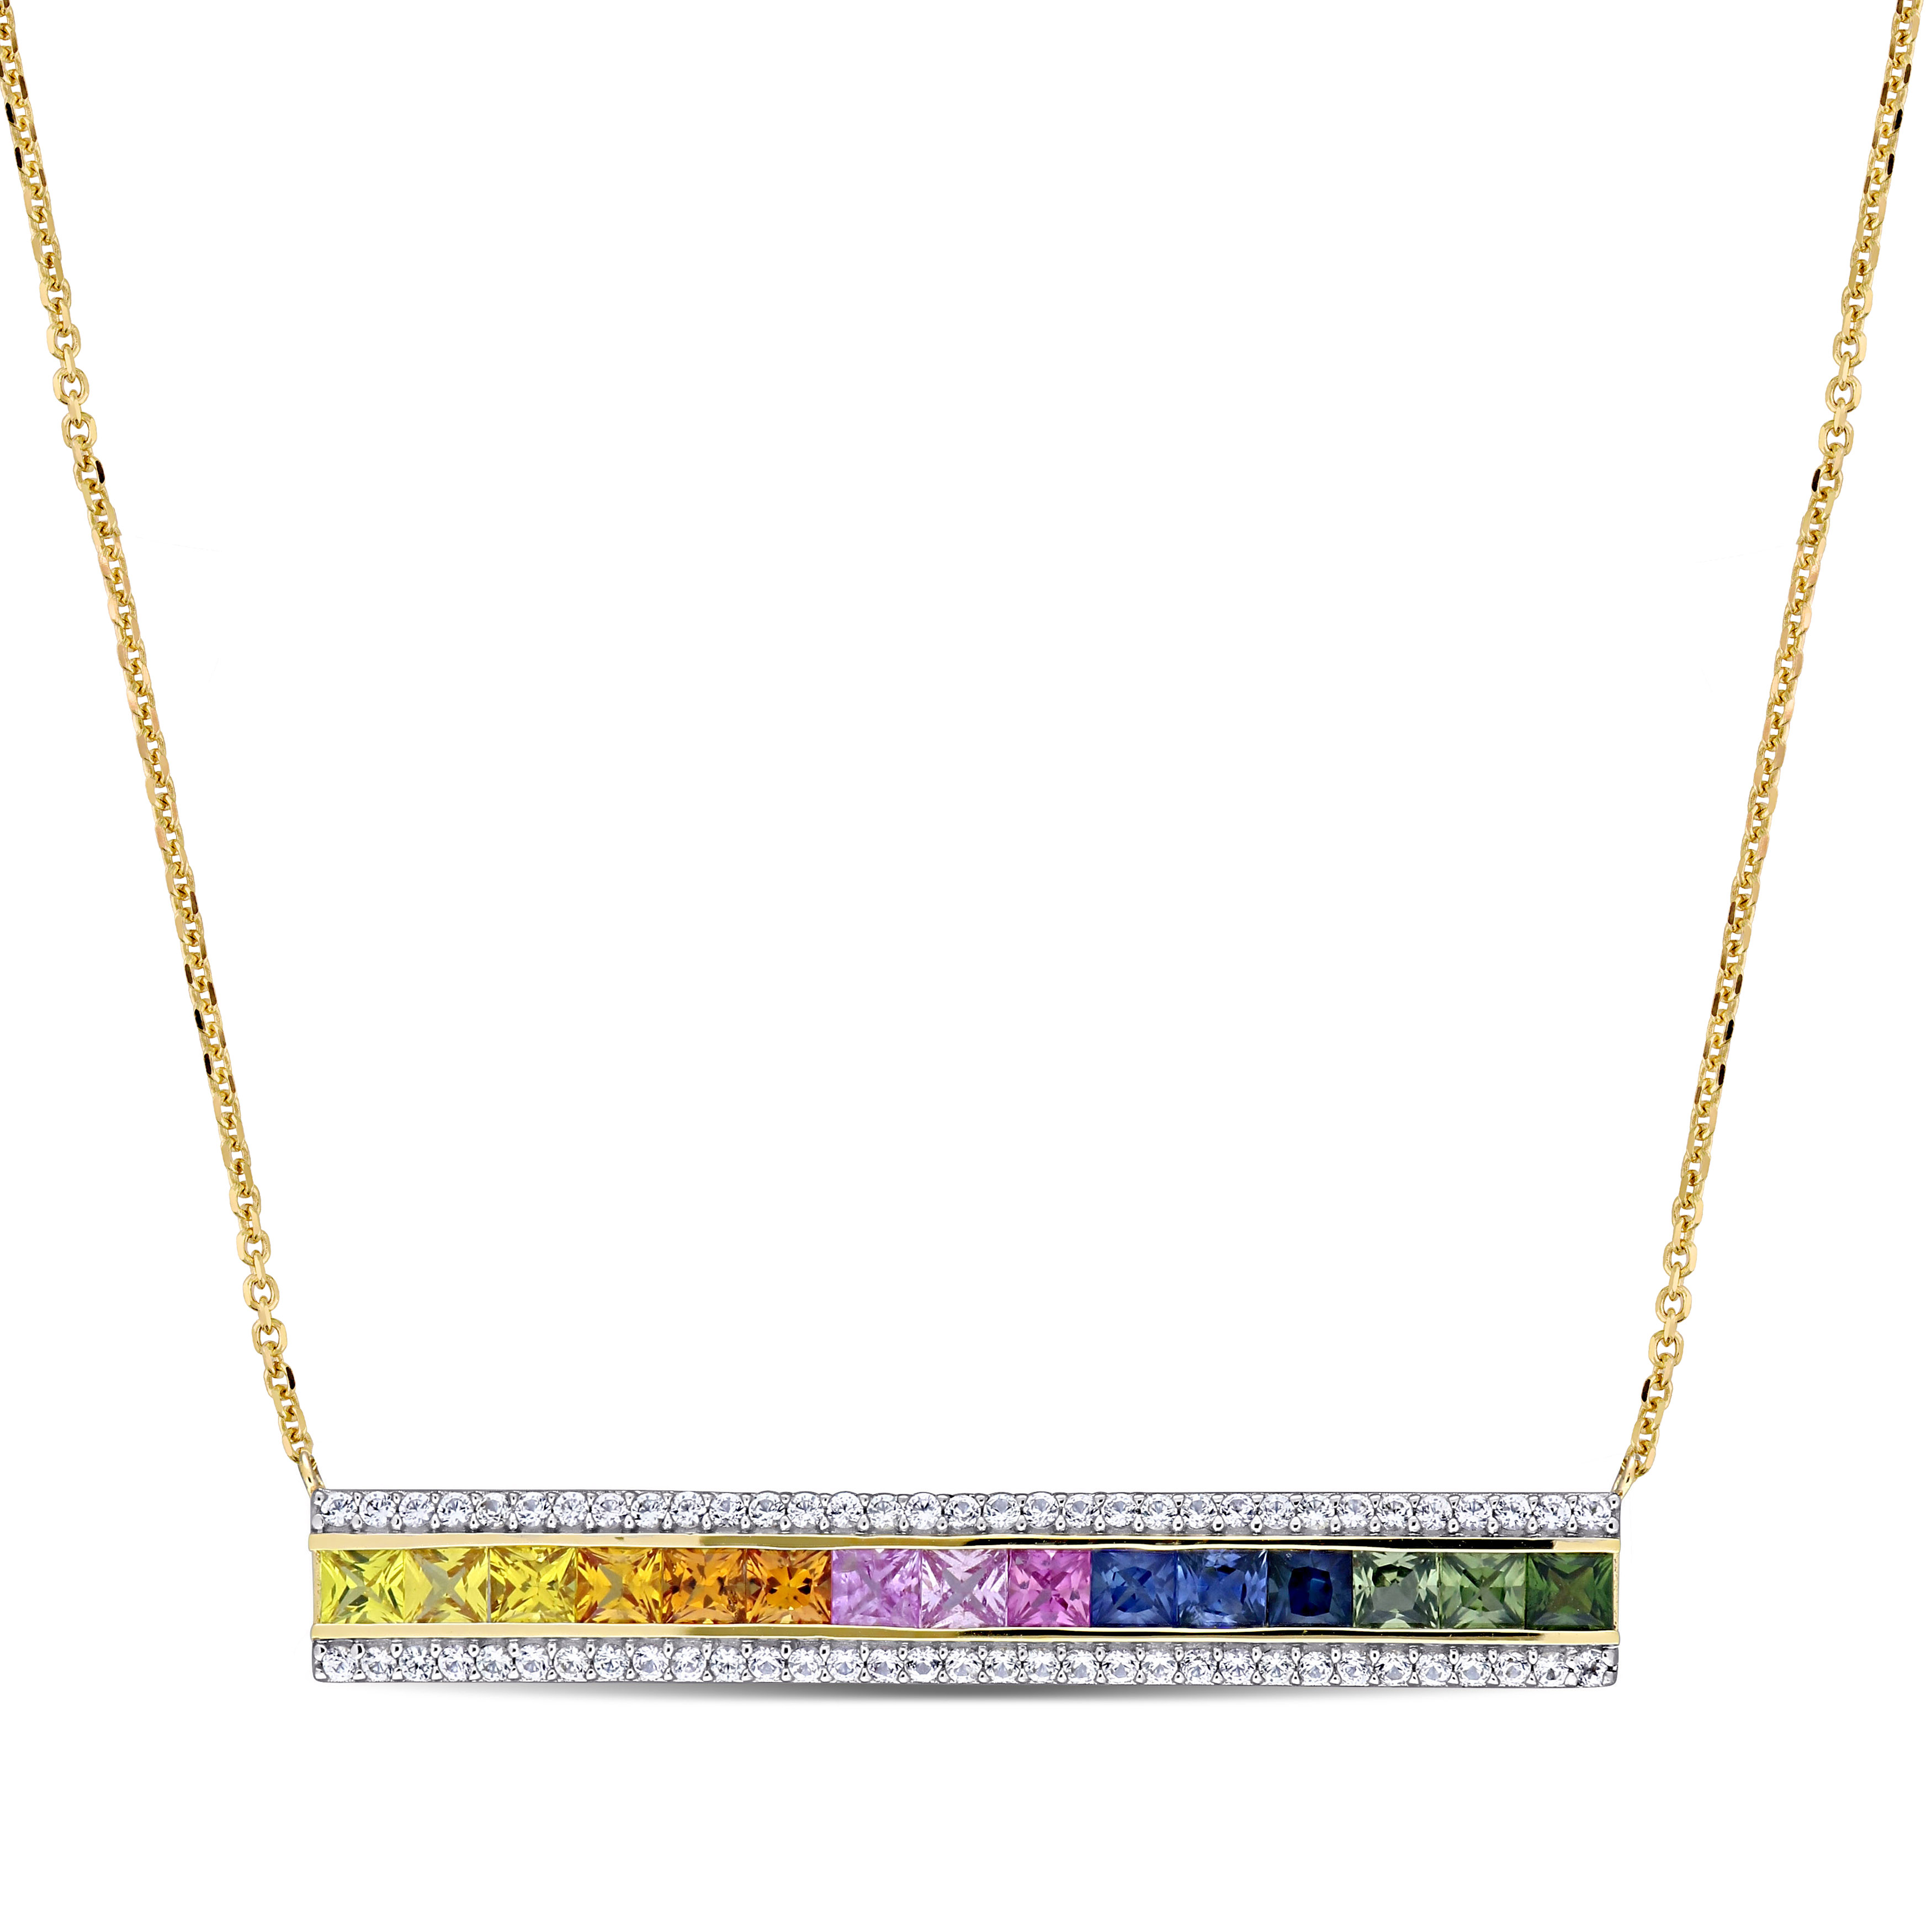 4 1/10 CT TGW Multi-Color Square and Round Sapphire Bar Necklace with Chain in 14k Yellow Gold - 18 in.